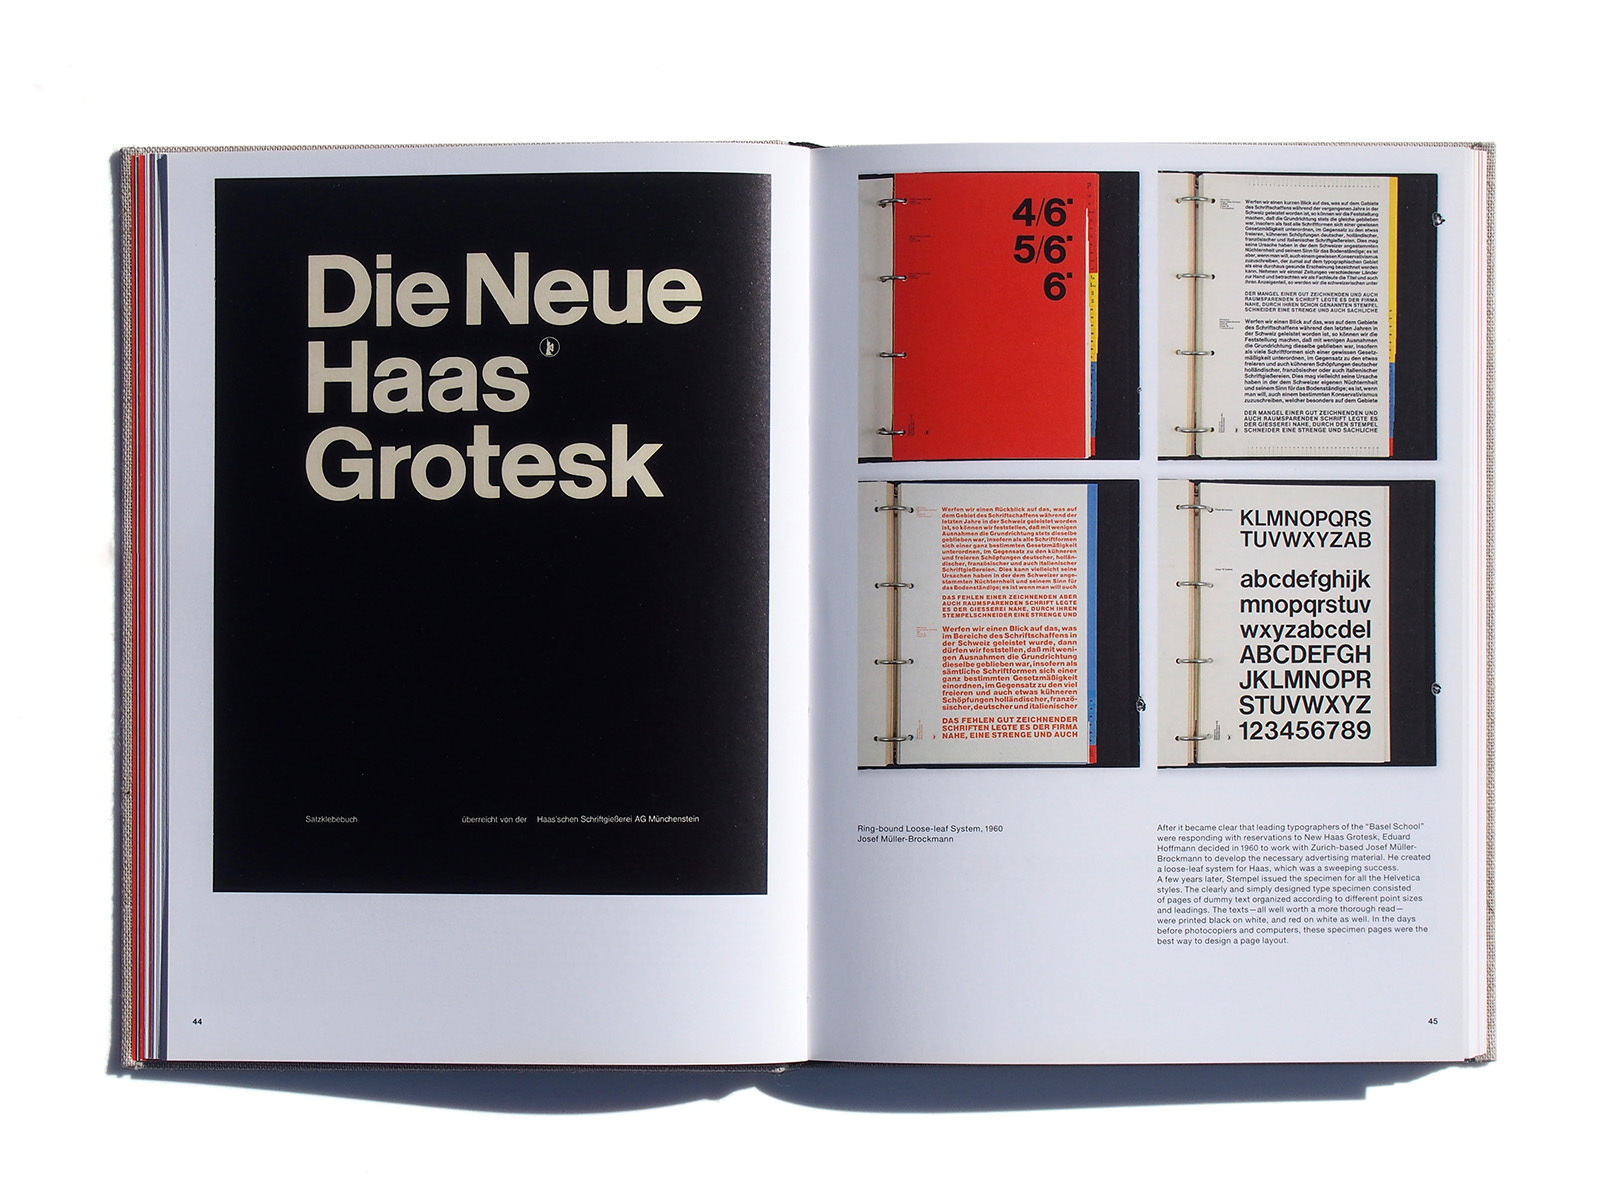 Helvetica Forever: Story of a Typeface | SPREAD